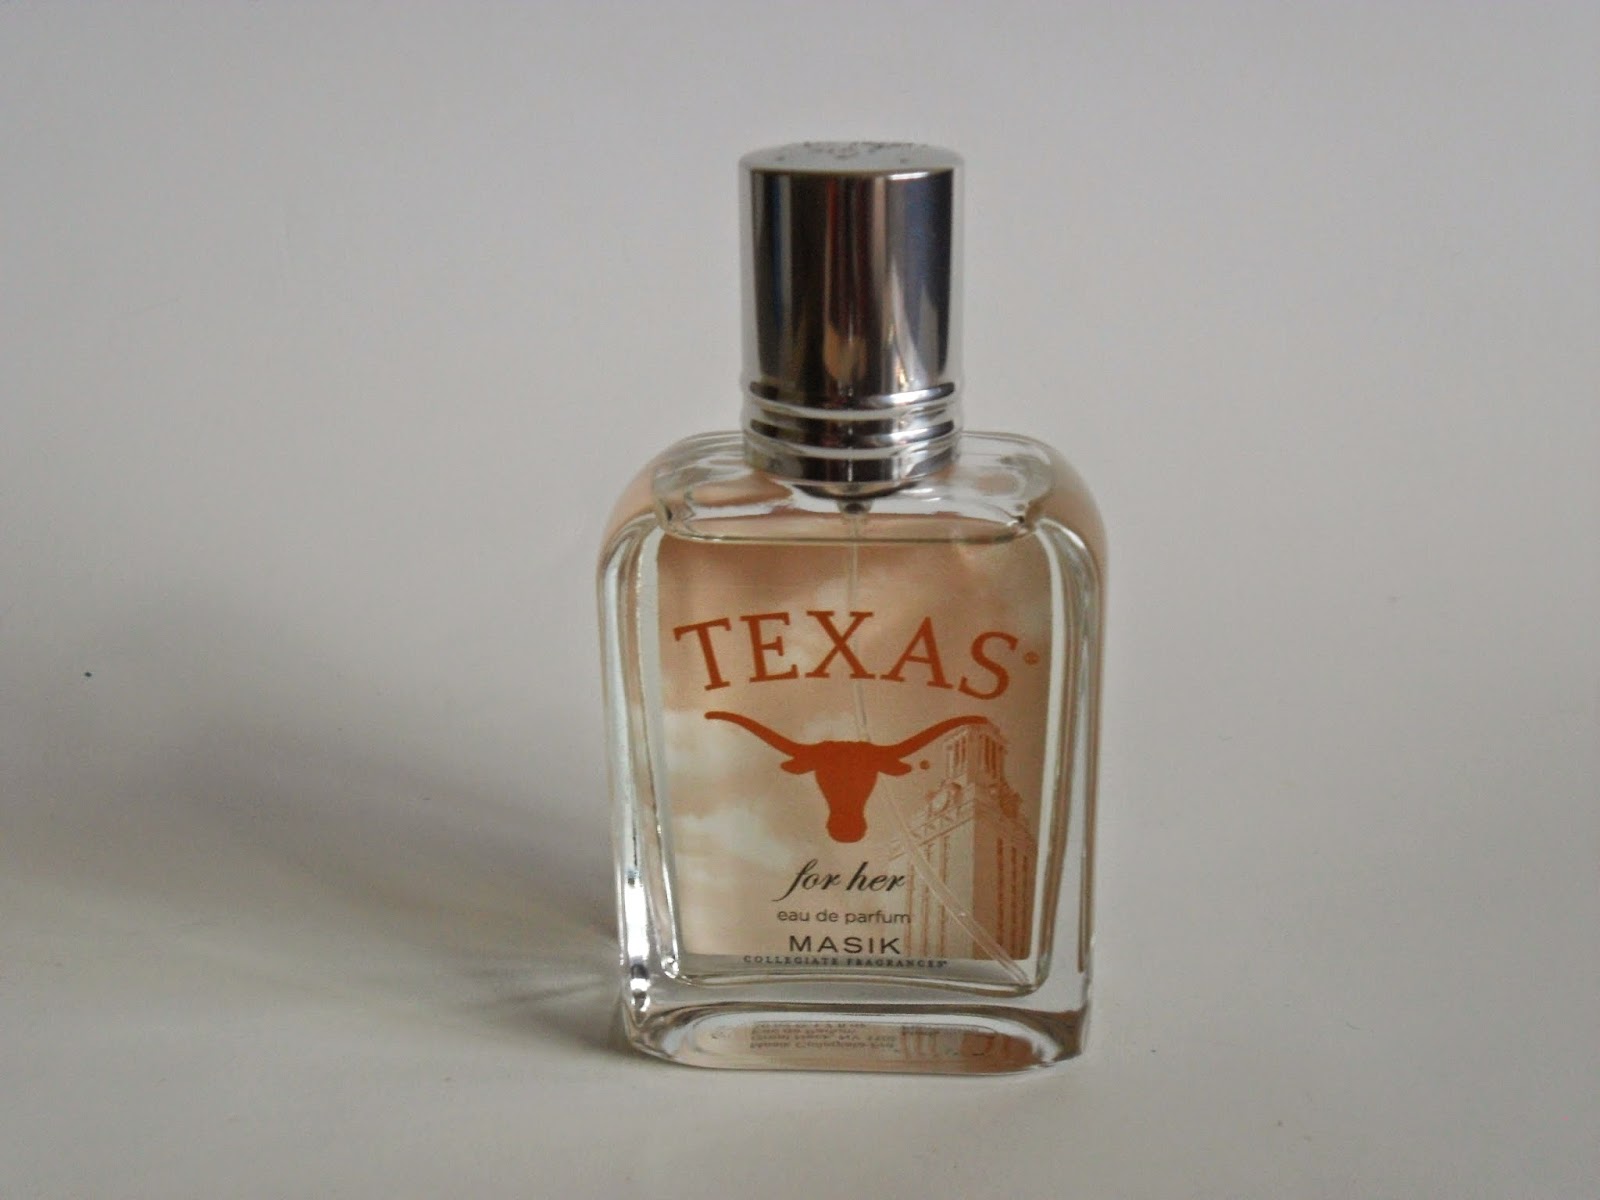 Wear your Favorite College Fragrance with Masik Collegiate. Review & Giveaway